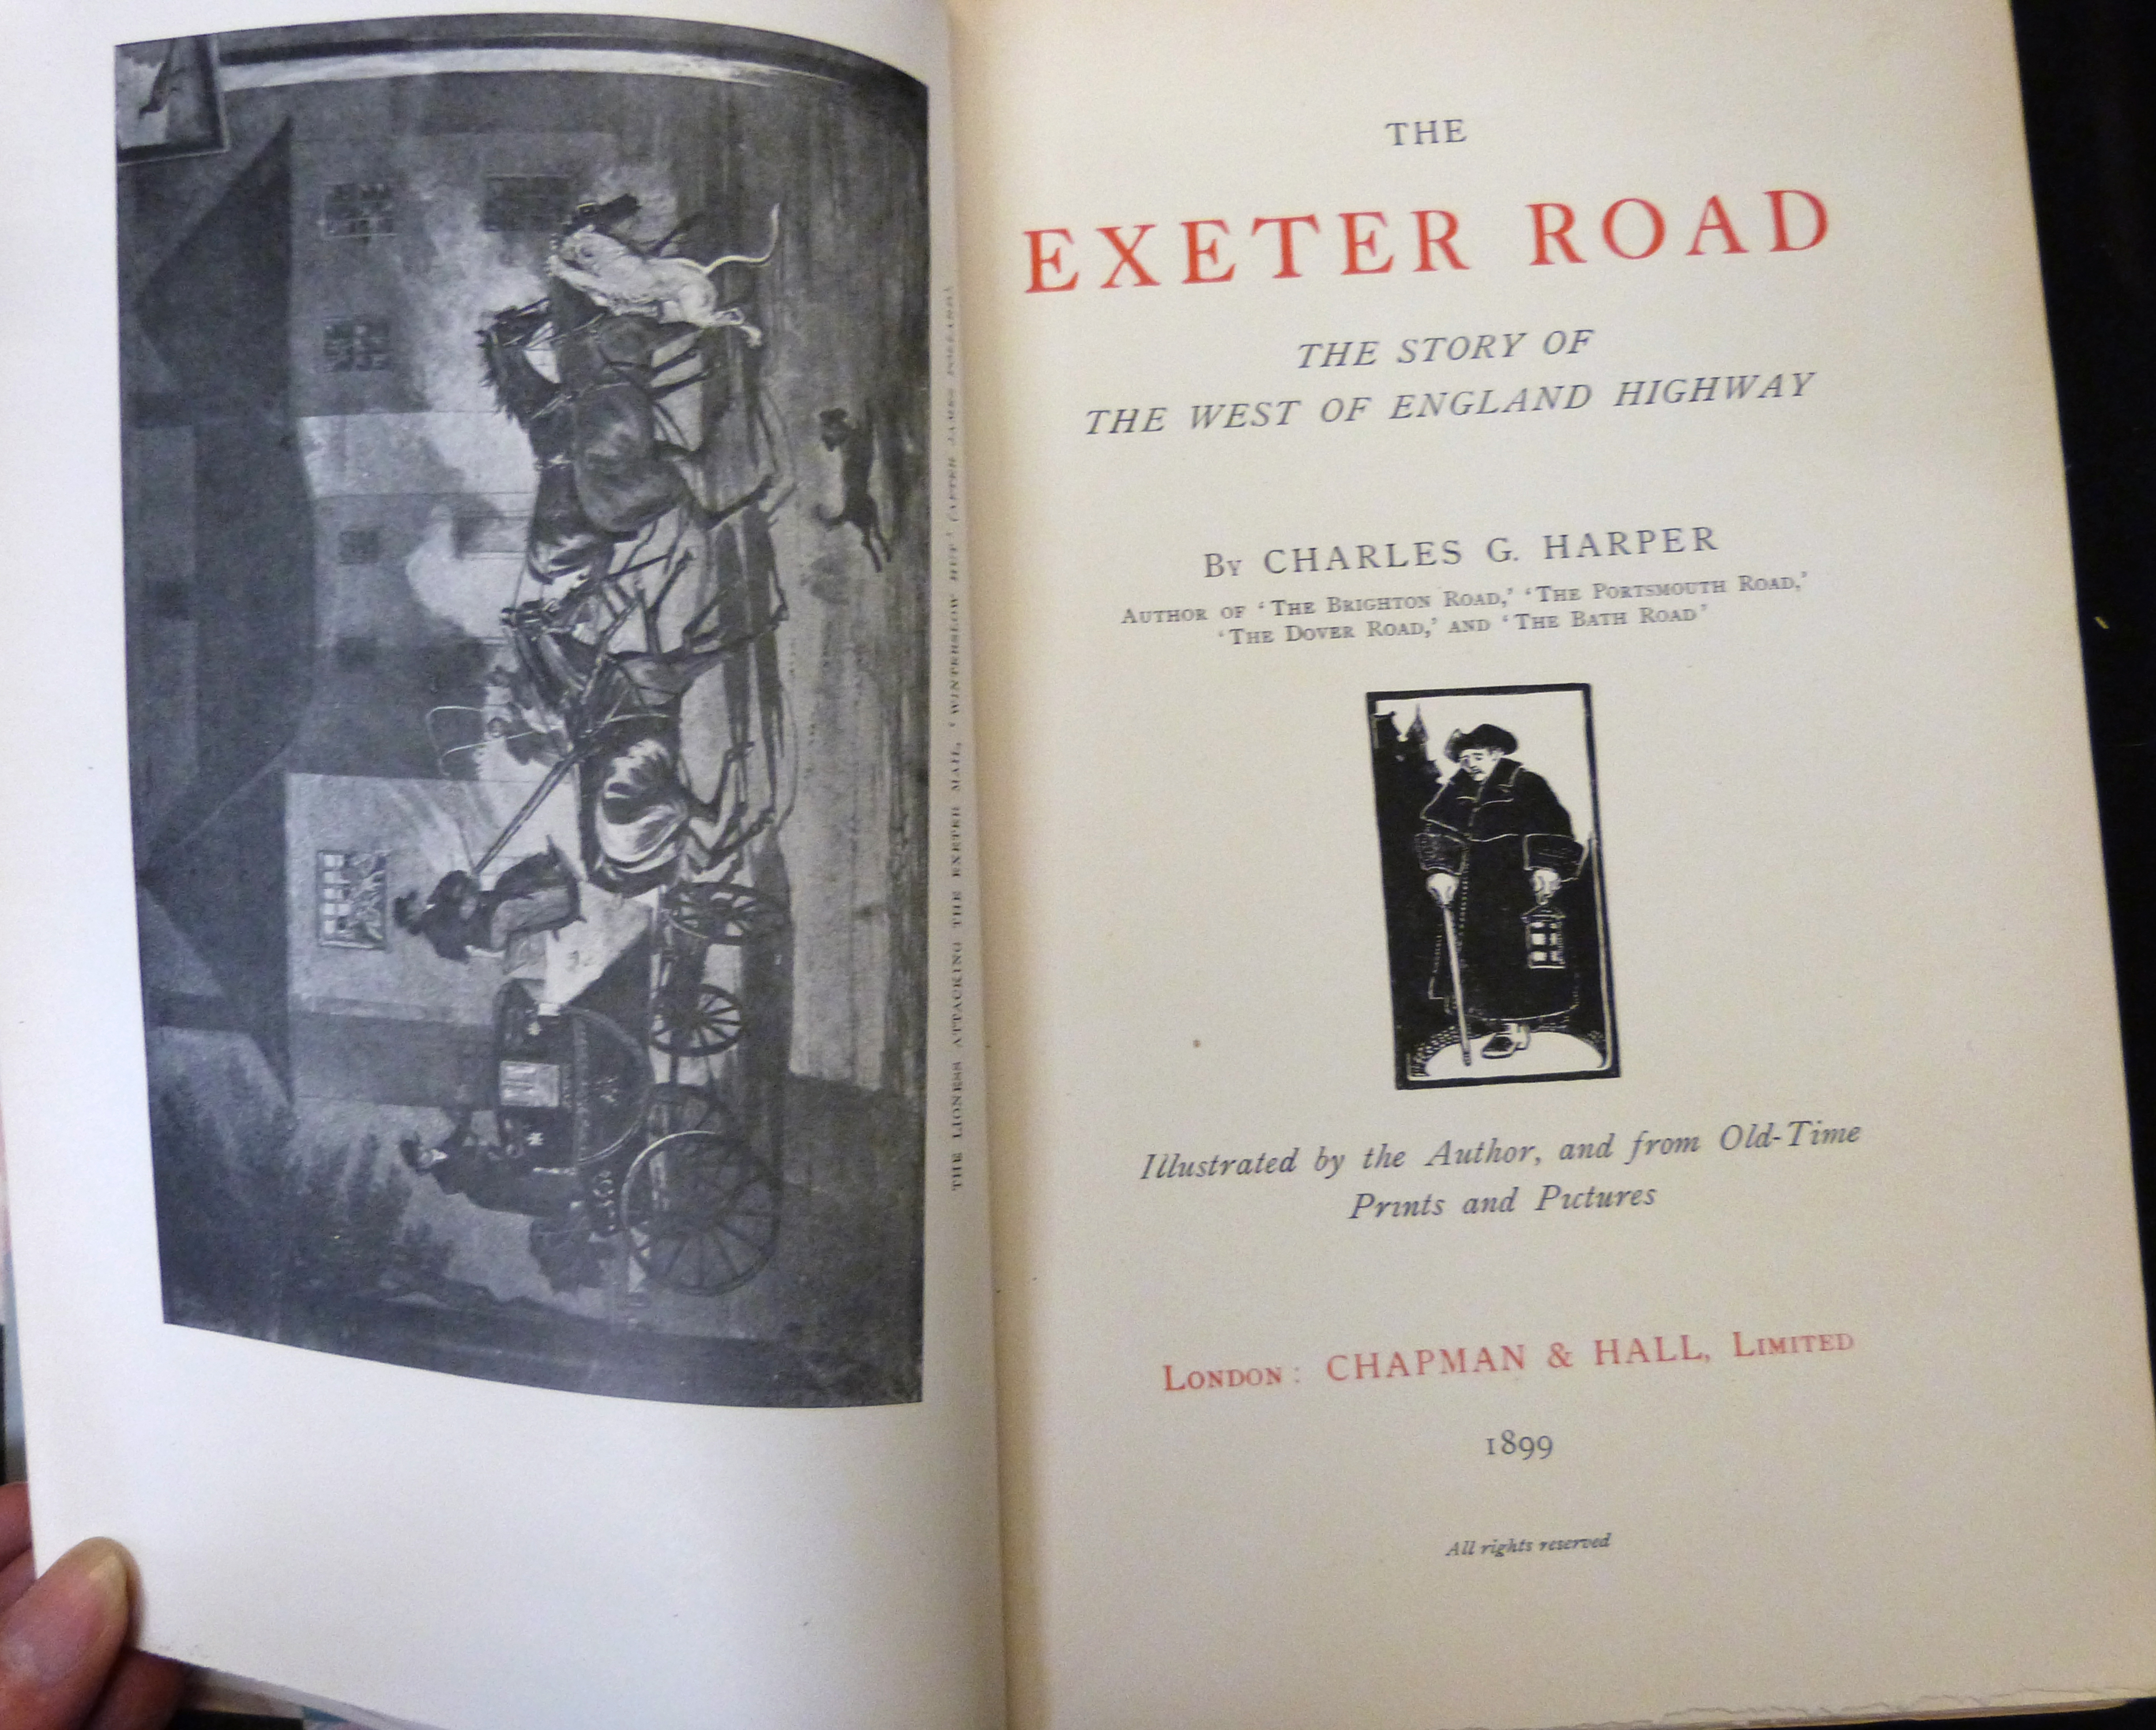 CHARLES GEORGE HARPER: THE EXETER ROAD, THE STORY OF THE WEST OF ENGLAND HIGHWAY, London,